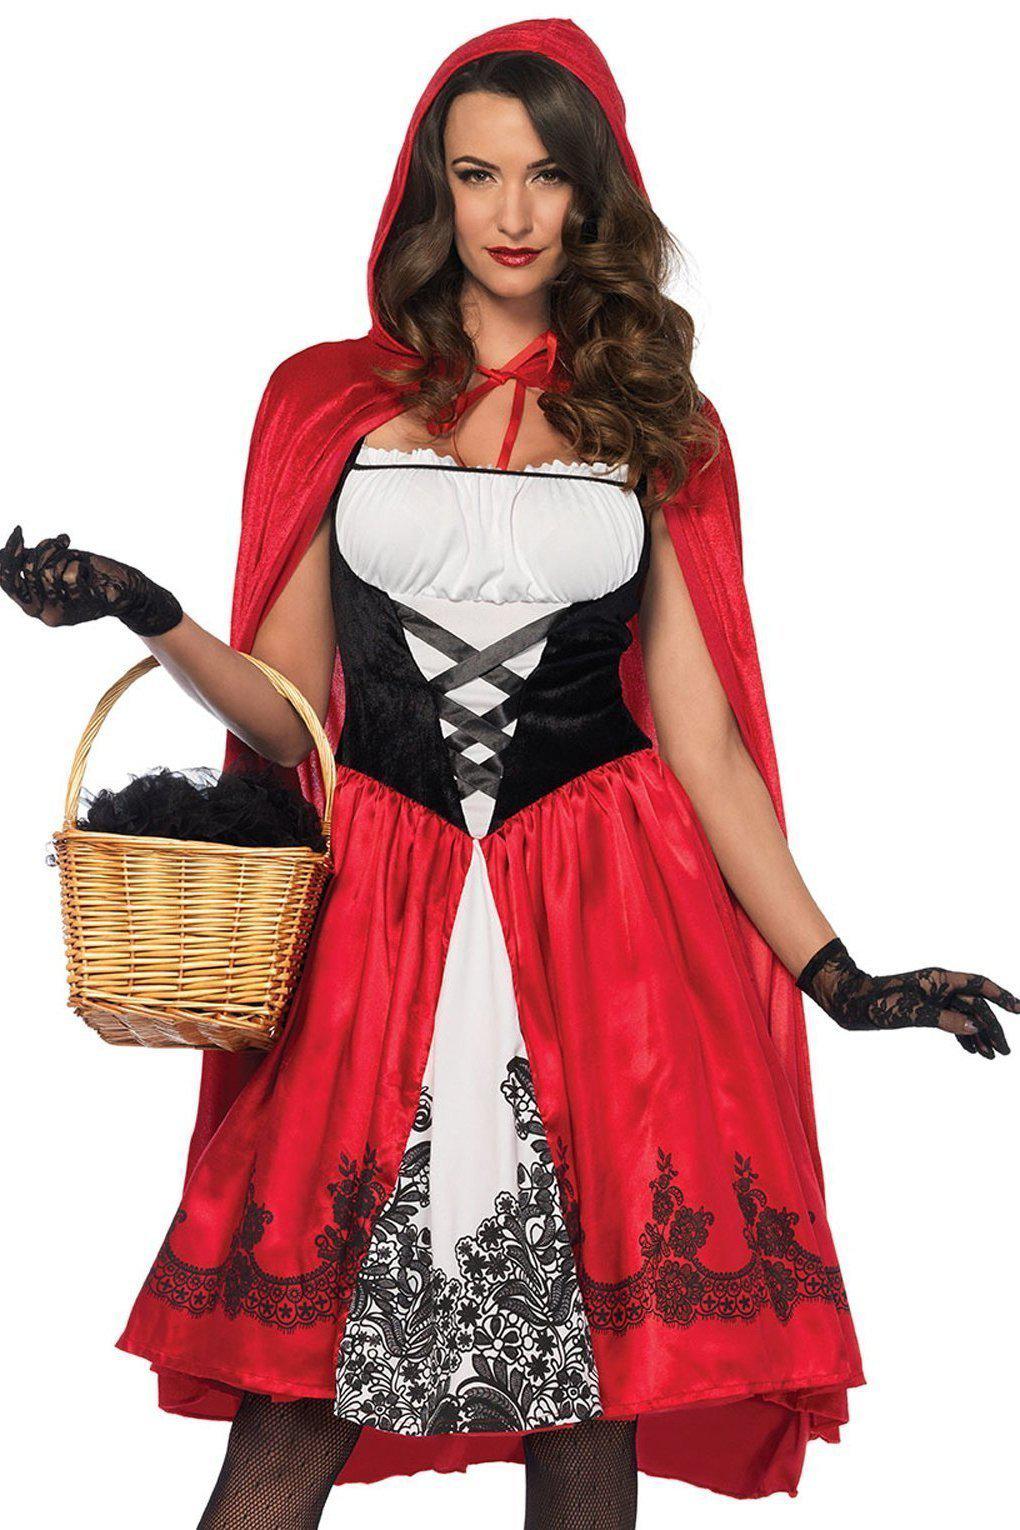 Classic Red Riding Hood Costume-Fairytale Costumes-Leg Avenue-Red-S-SEXYSHOES.COM